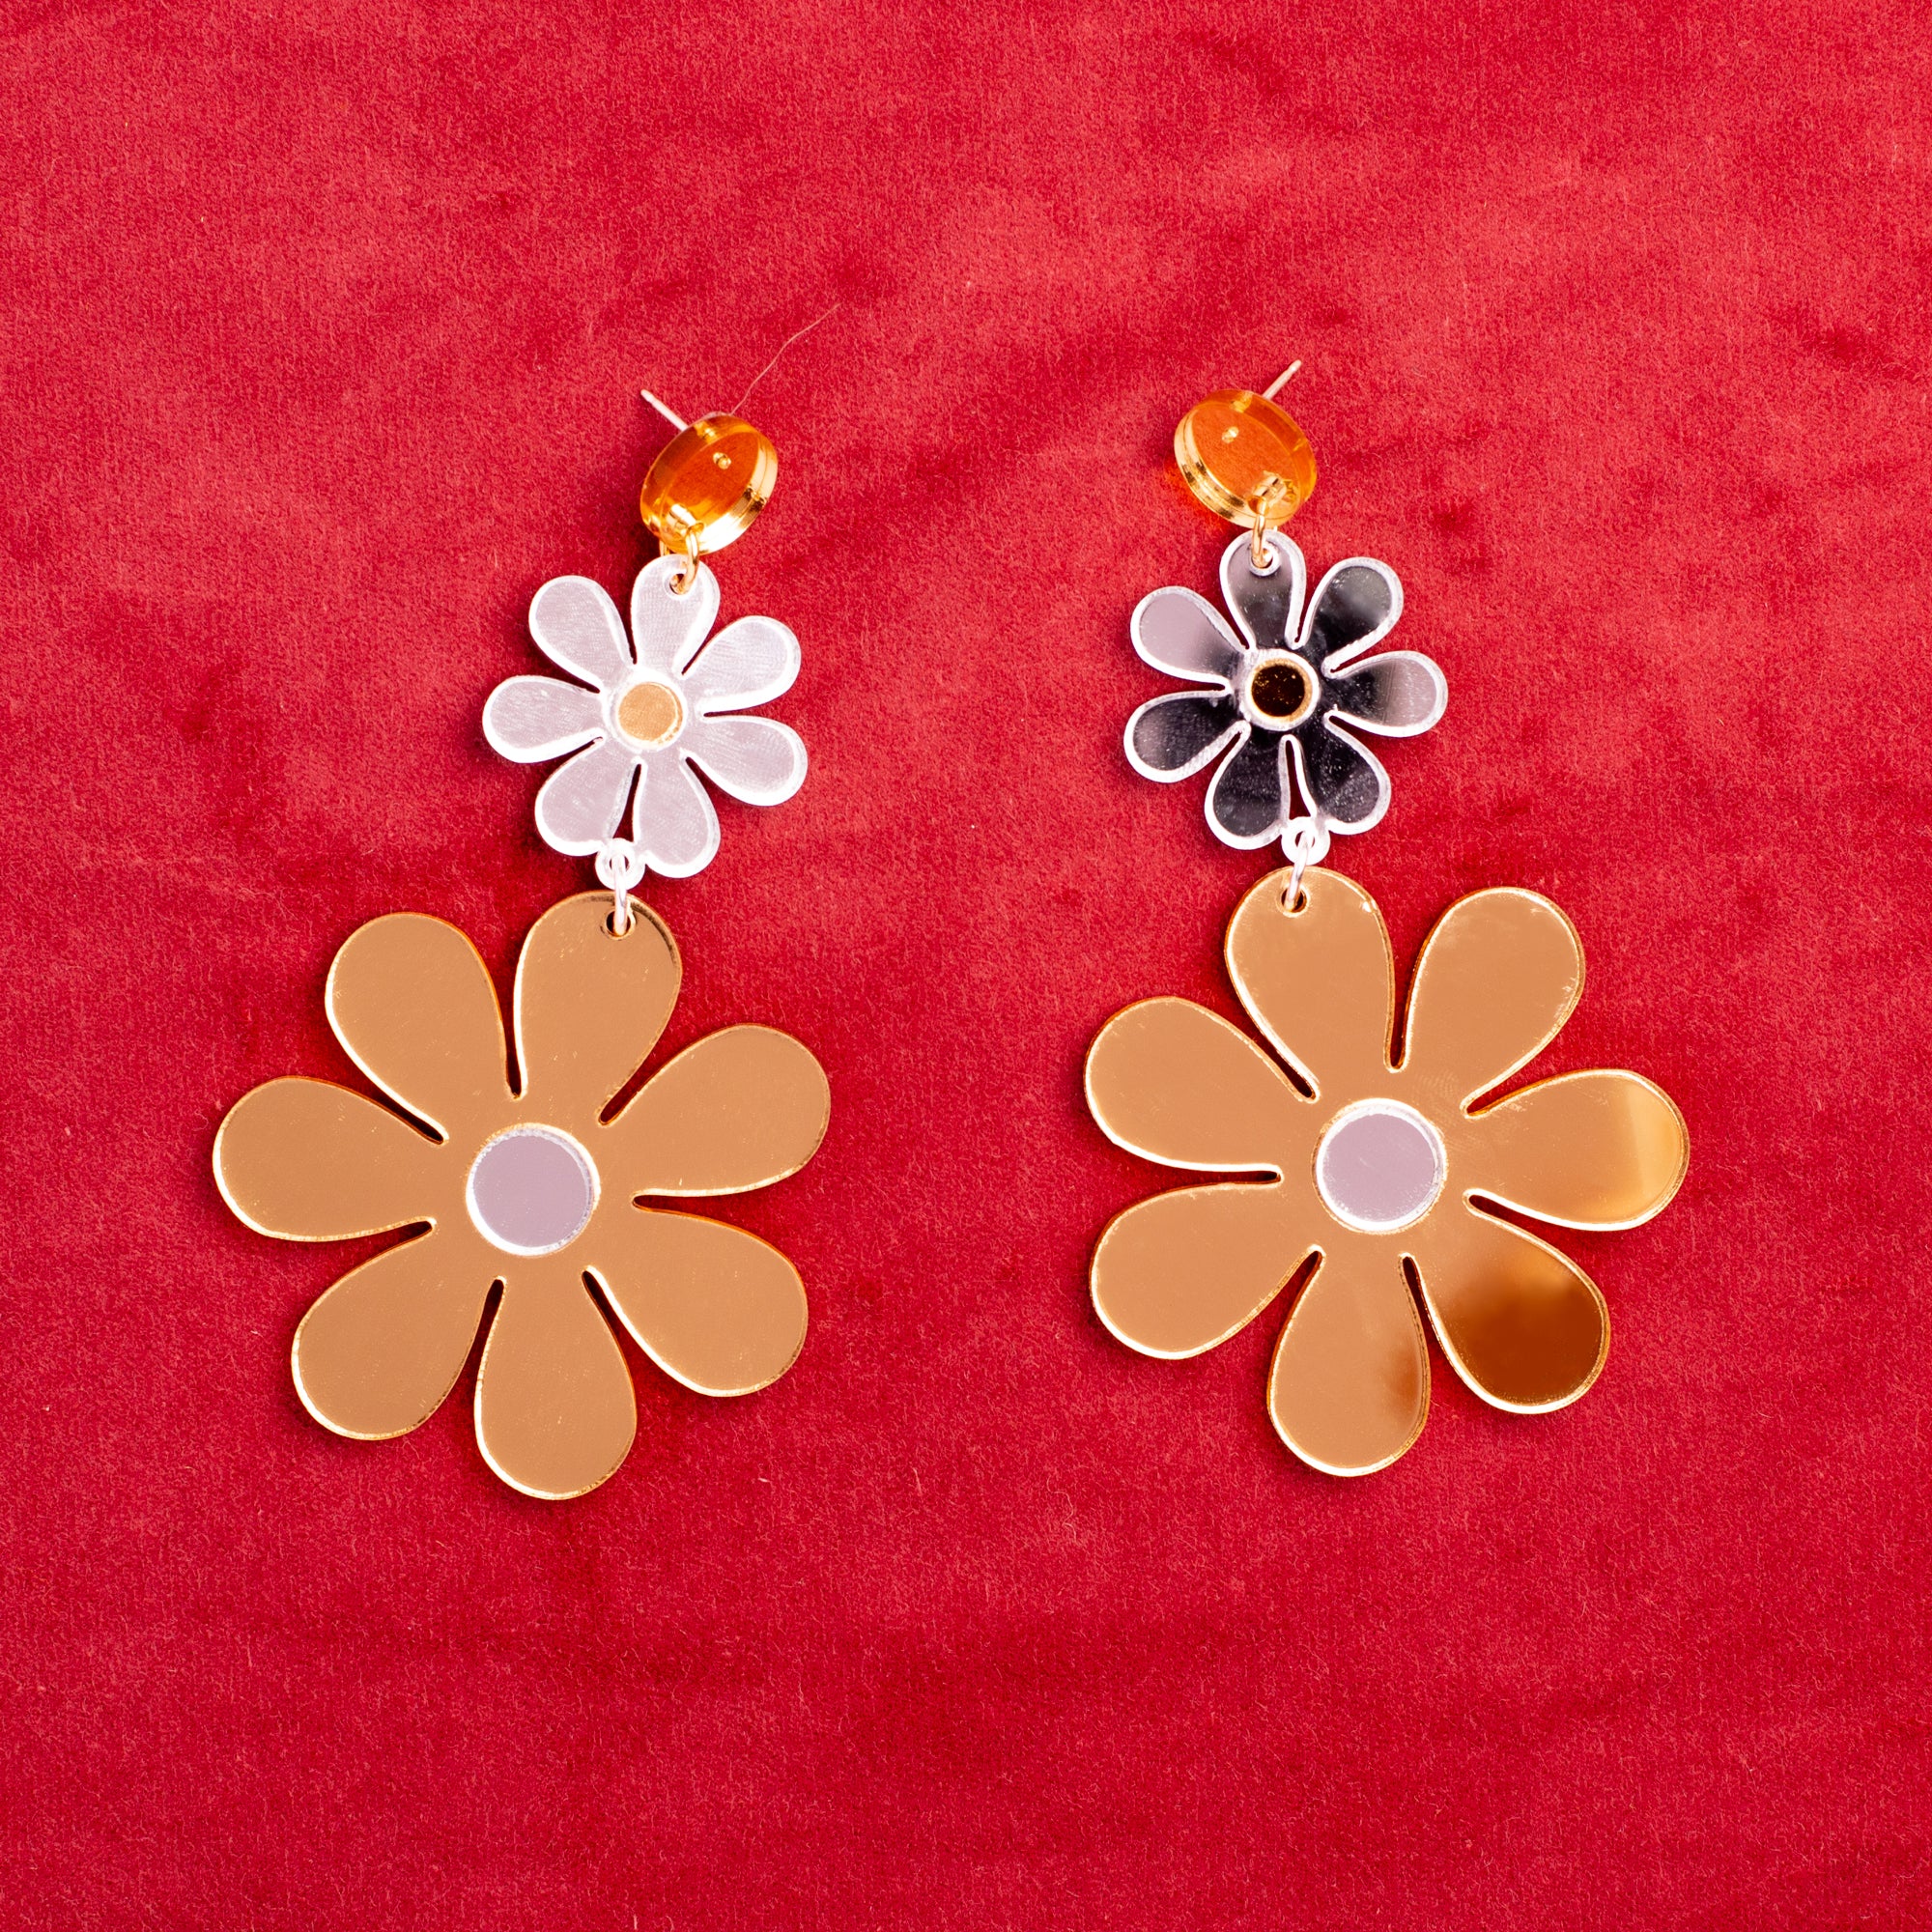 The Double Daisy Hanging Stud Earrings